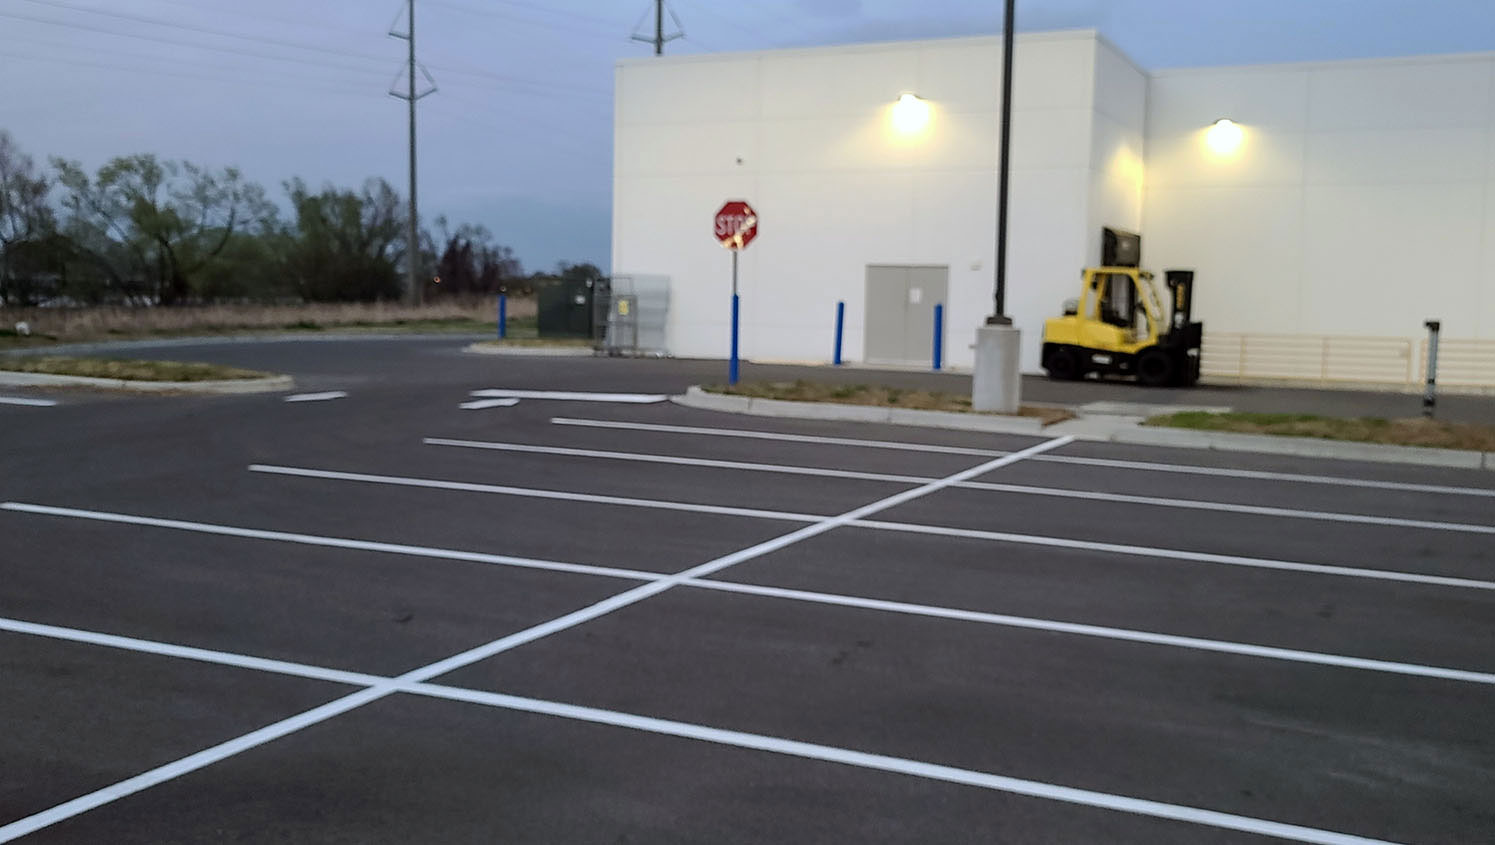 Gander Outdoors’ and Camping World’s new parking lot stalls